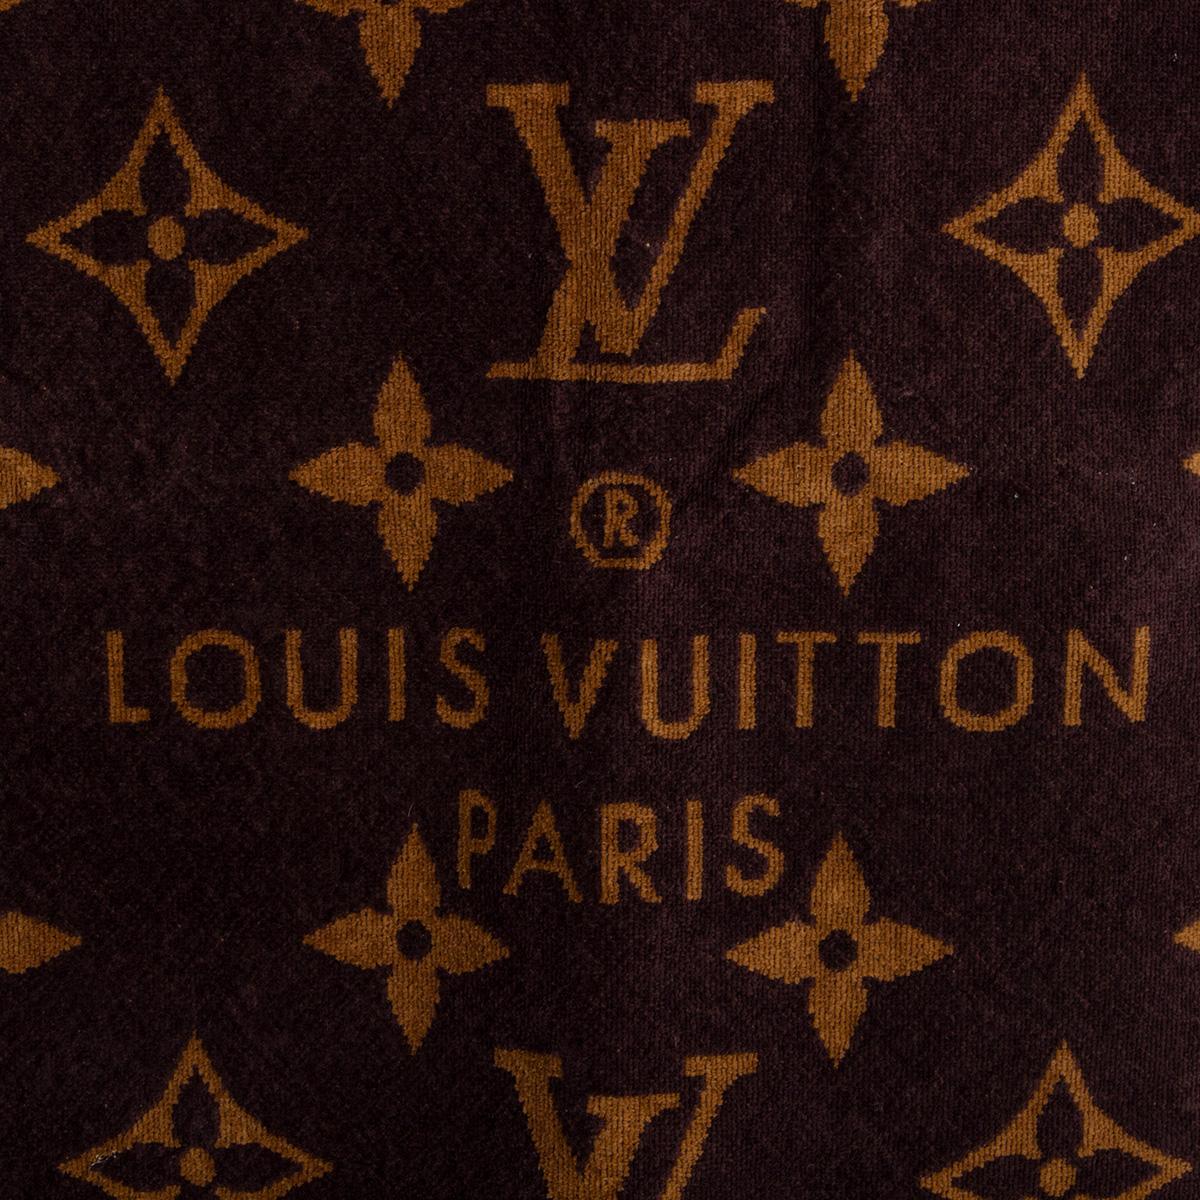 100% authentic Louis Vuitton's iconic Monogram pattern comes in velvet-soft, jacquard-weave cotton (100%) for style and luxury on the beach. Has never been used and is in excellent condition. 

Measurements
Length	140cm (54.6in)
Width	80cm